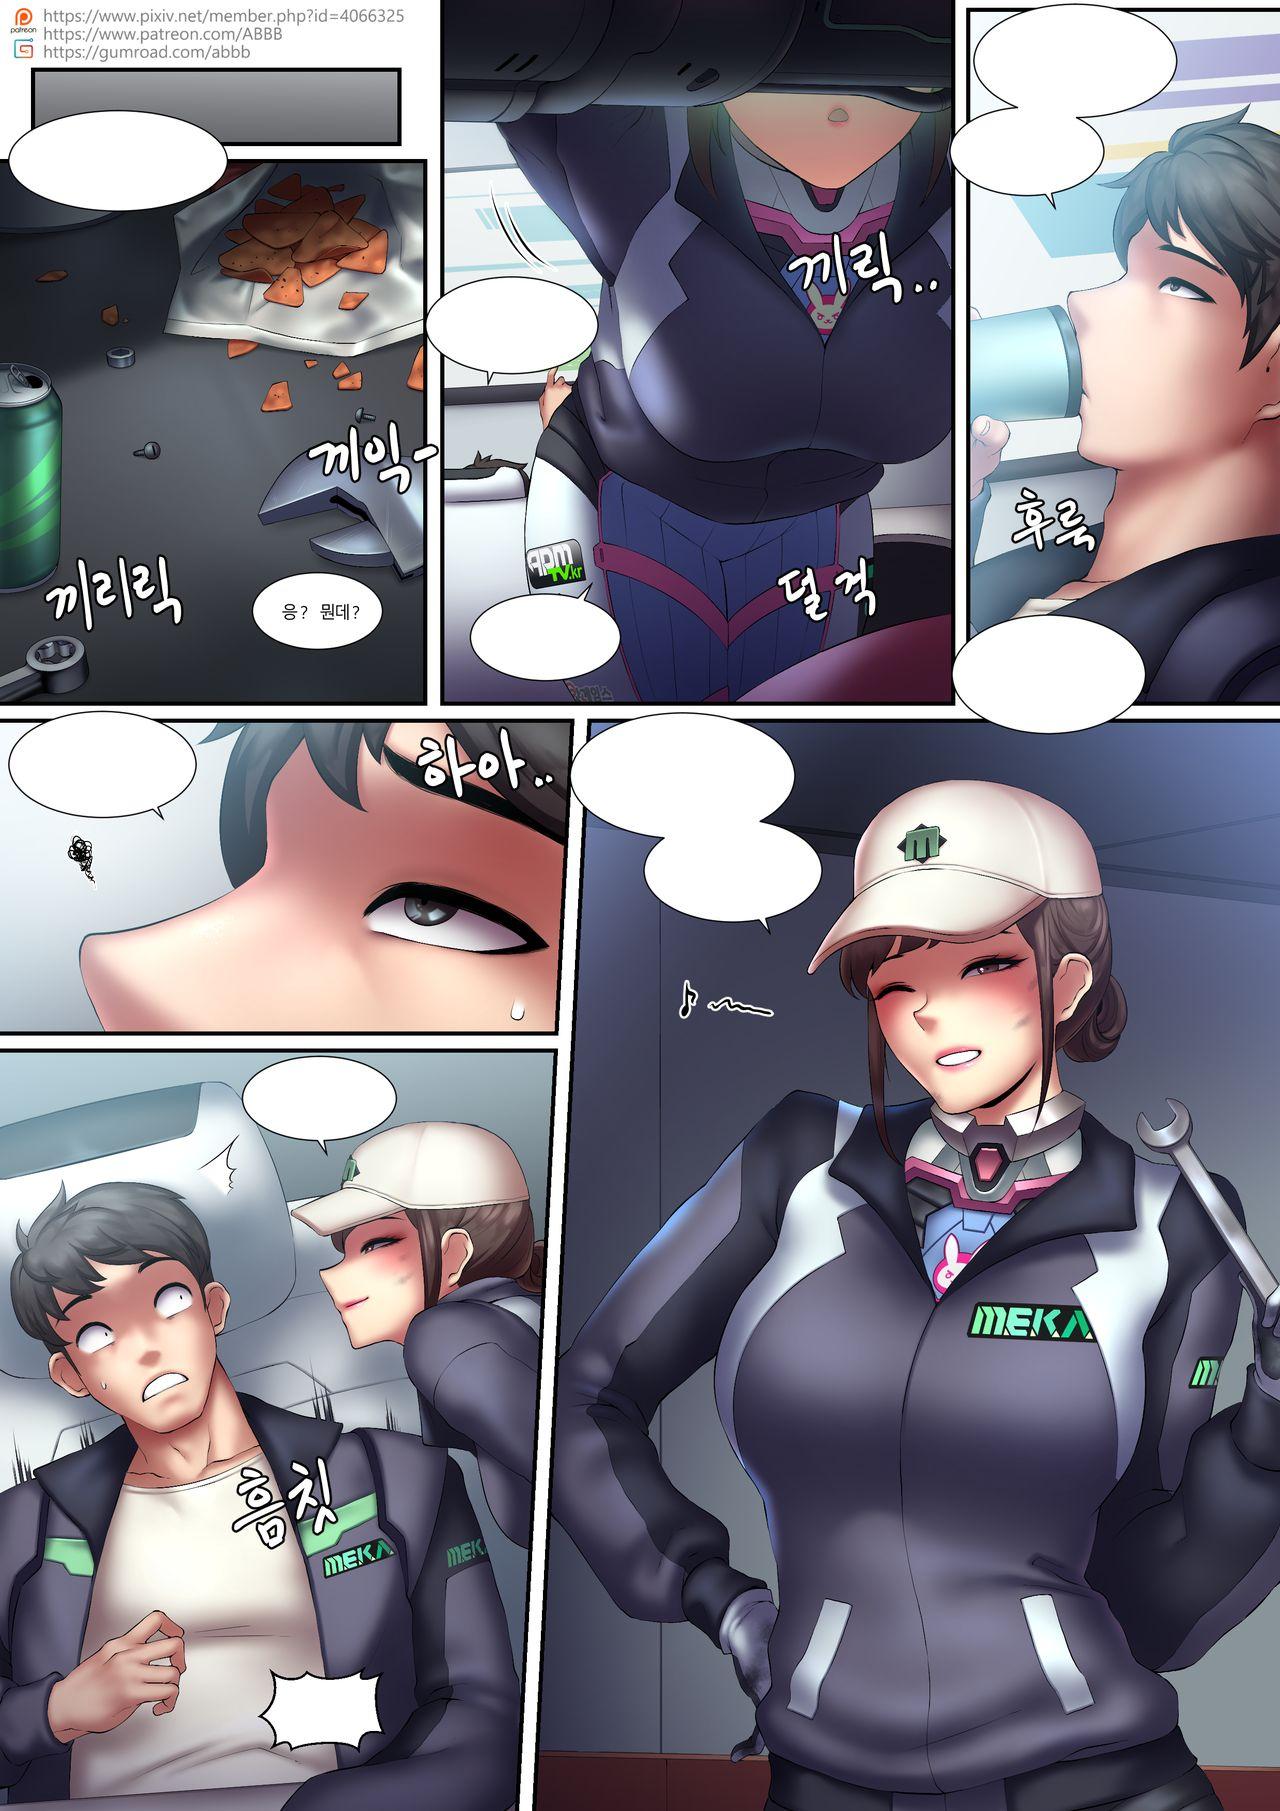 Dykes Shooting Star - Overwatch Wrestling - Page 2